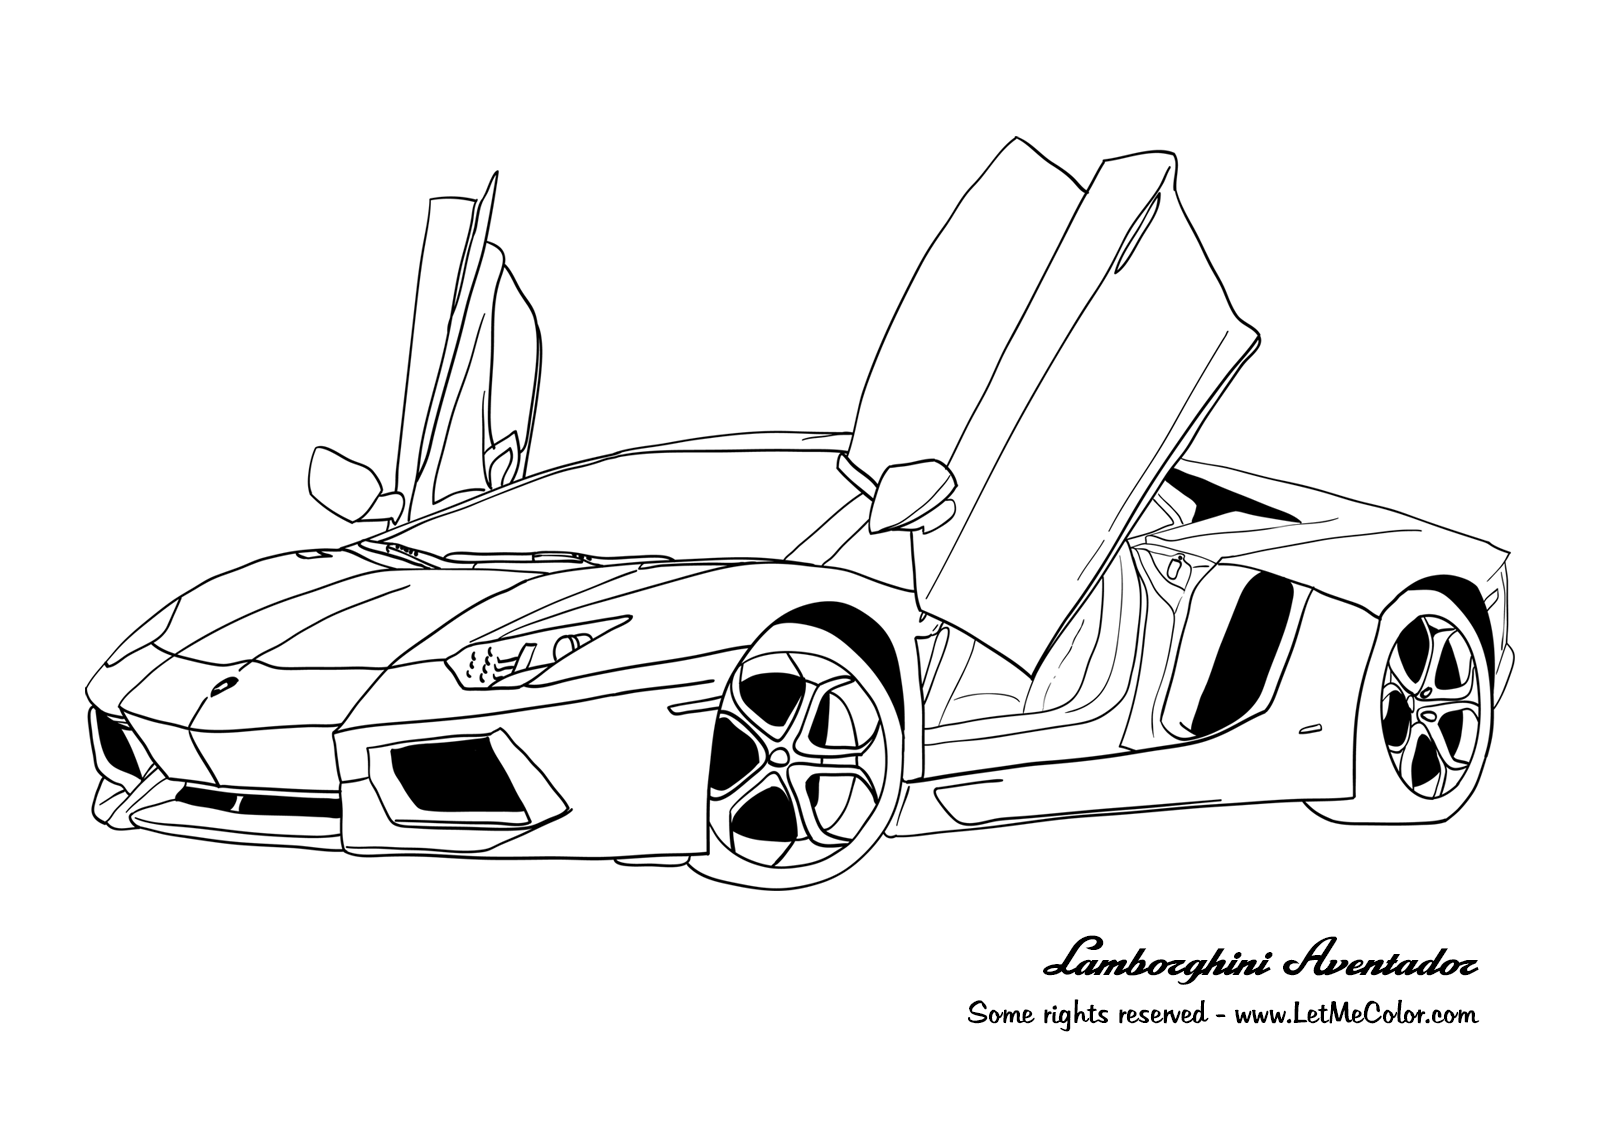 Free Coloring Pages For Kids To Print And Color Cars Sarasota Find The Newest Extraordinary I Cars Coloring Pages Truck Coloring Pages Race Car Coloring Pages